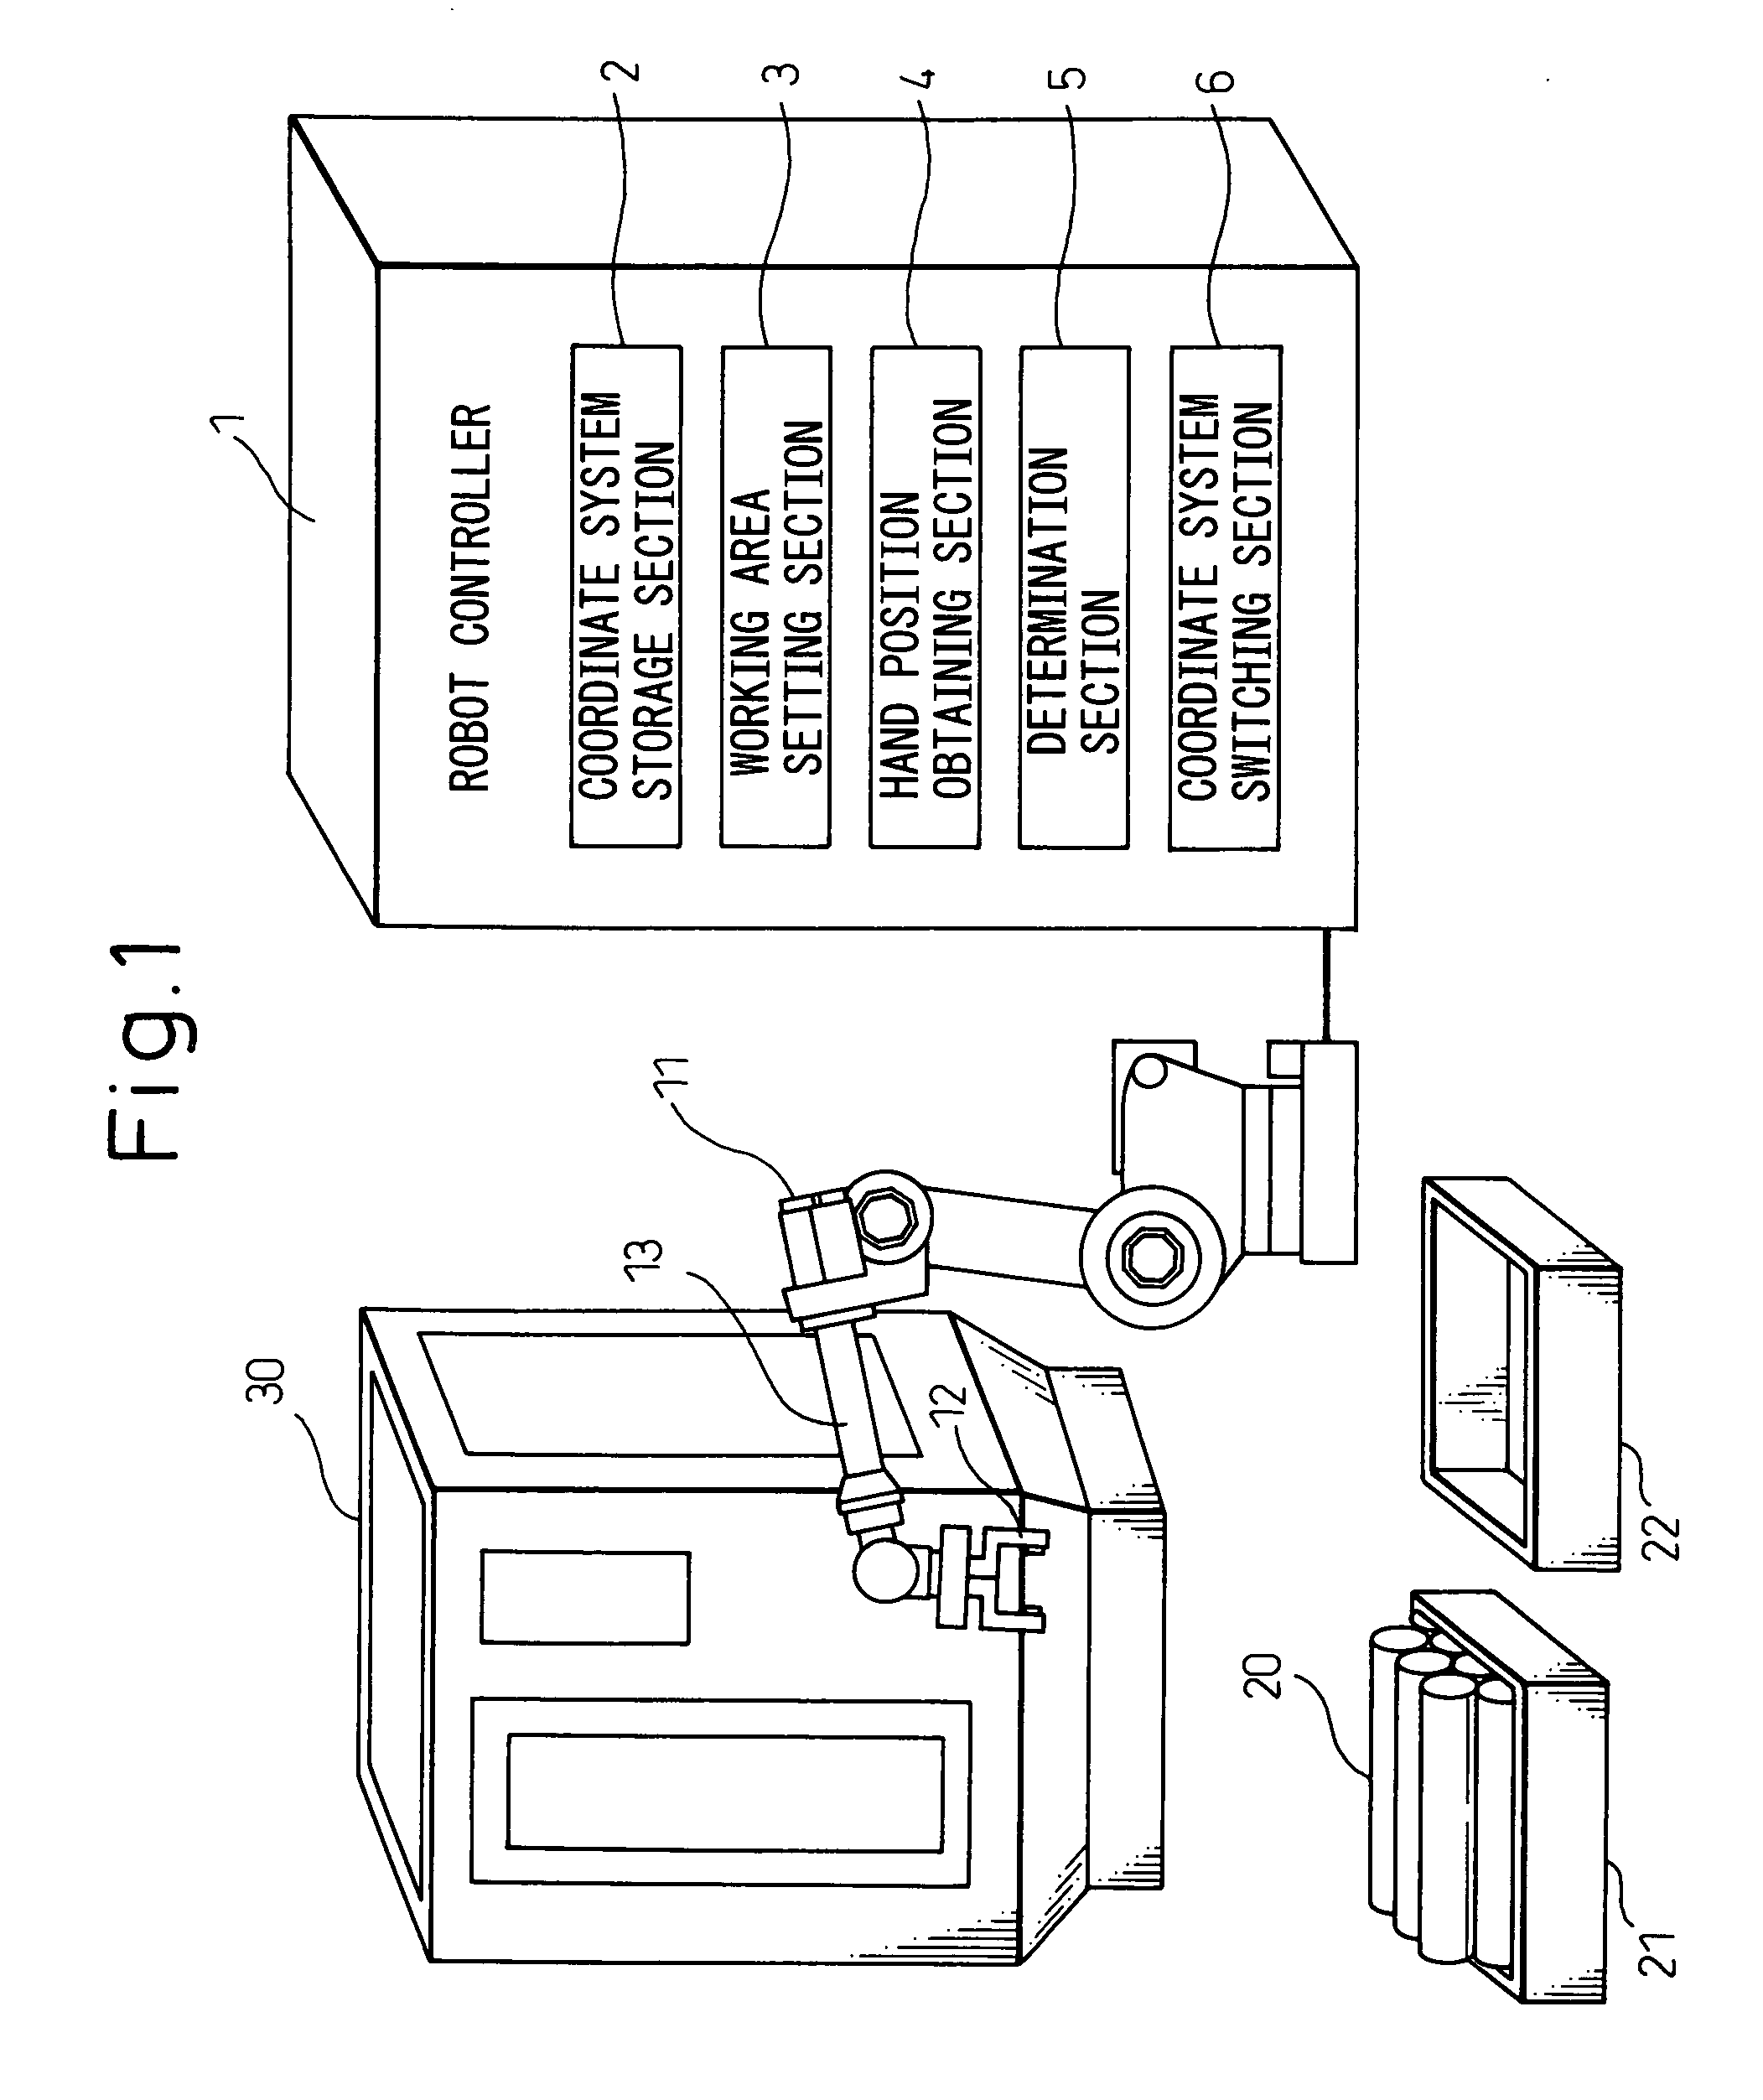 Controller of work piece-conveying robot